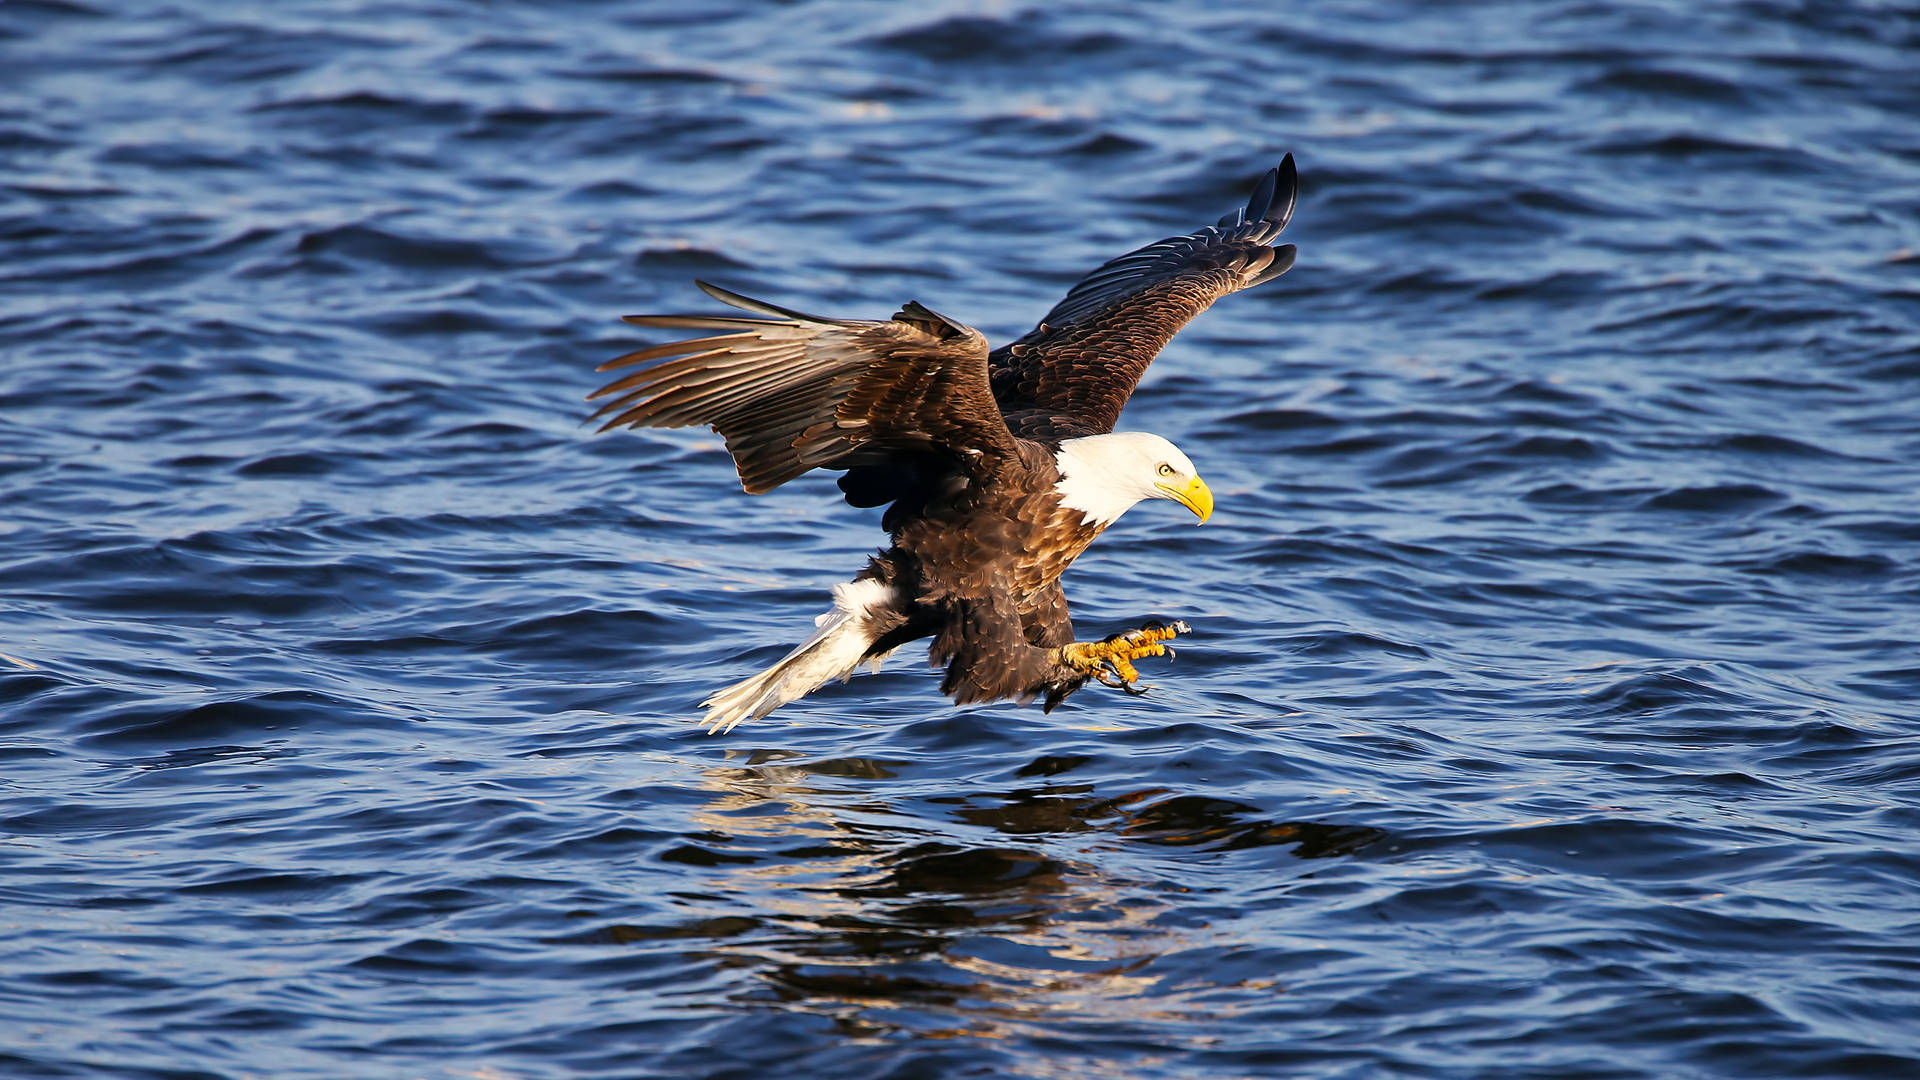 Us Eagle On Blue Water